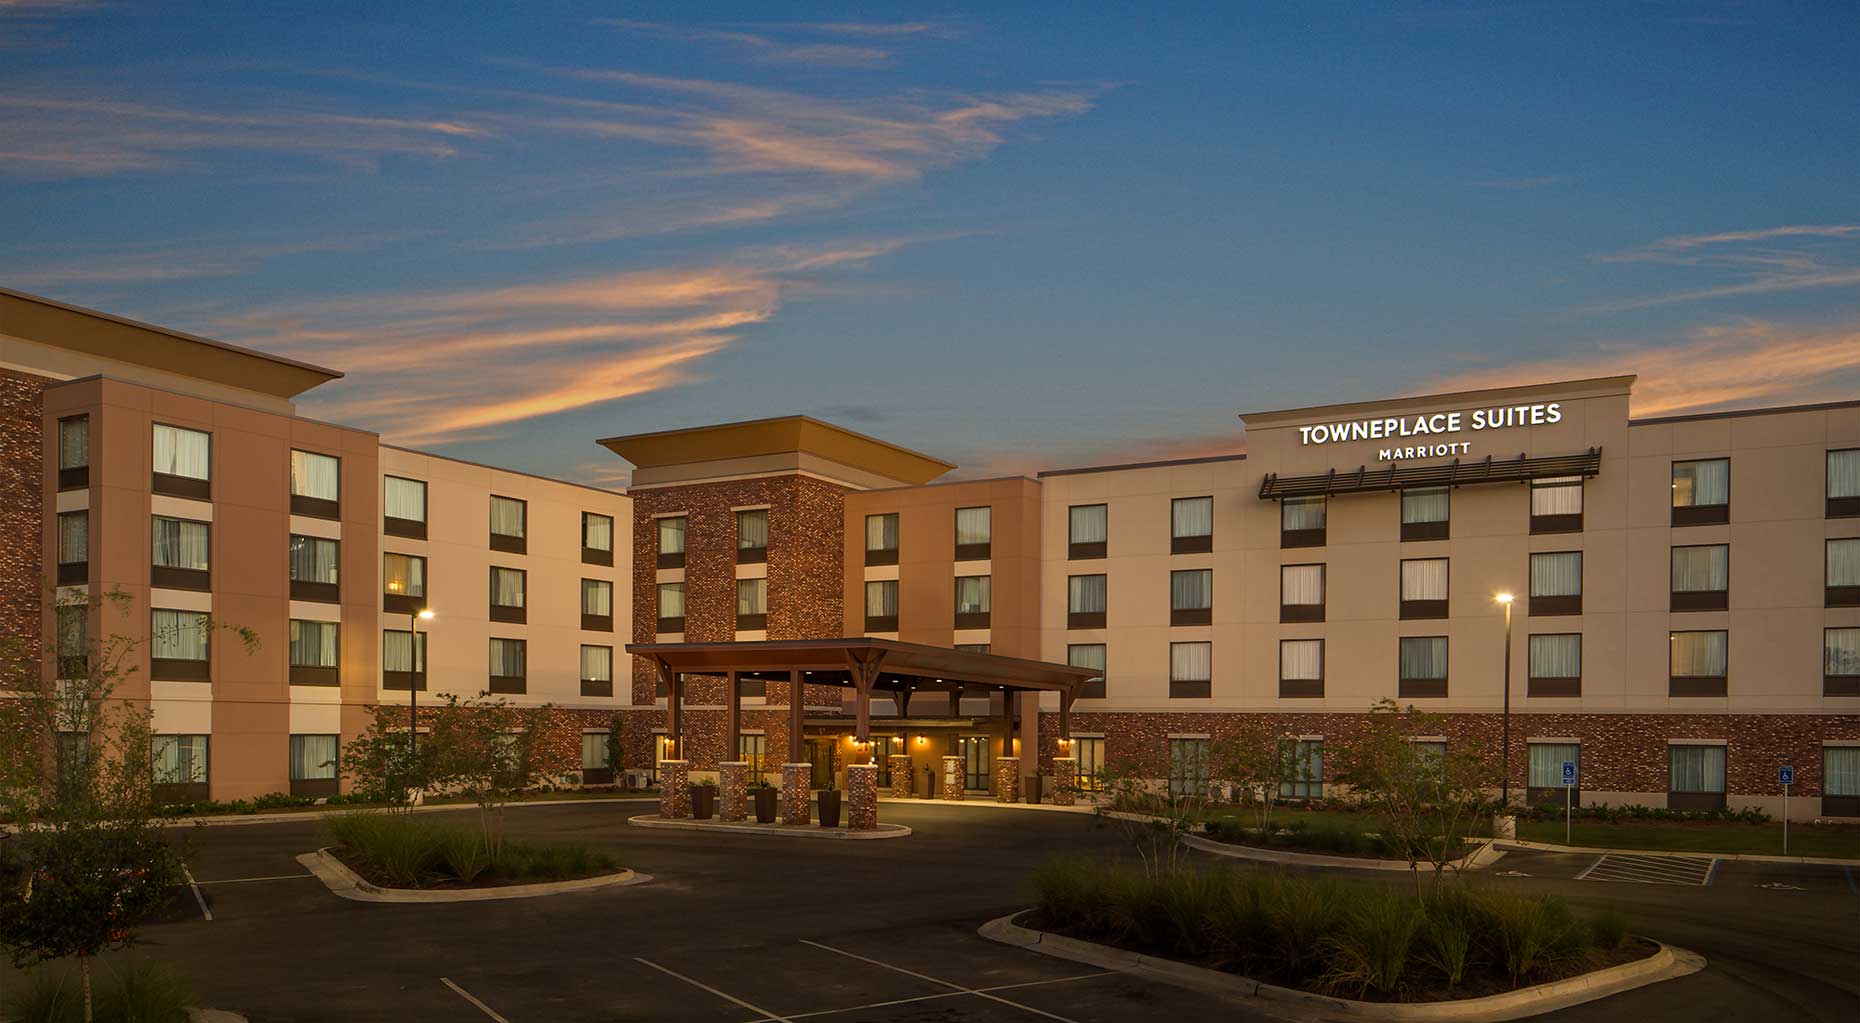 A pleasant twilight view of the TownePlace Suites Marriott in Foley, AL